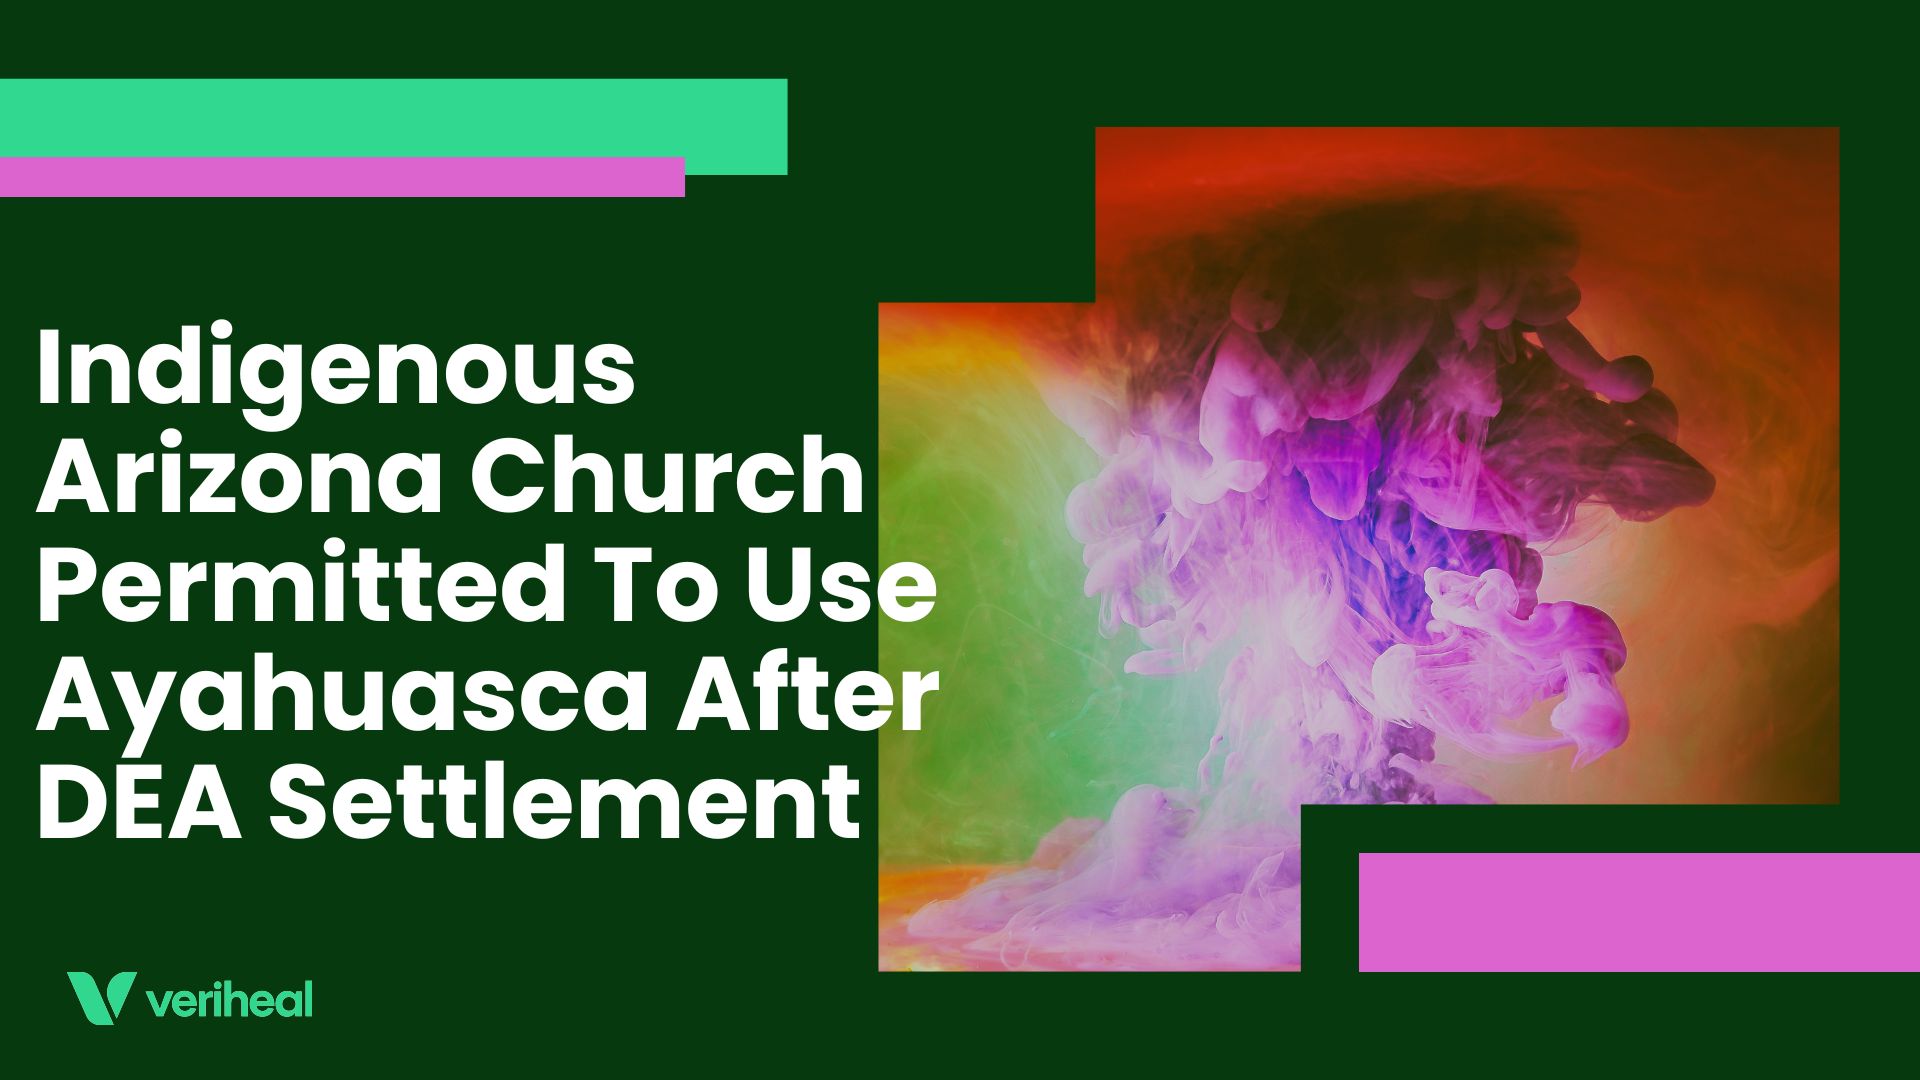 Indigenous Arizona Church Permitted To Use Ayahuasca After DEA Settlement